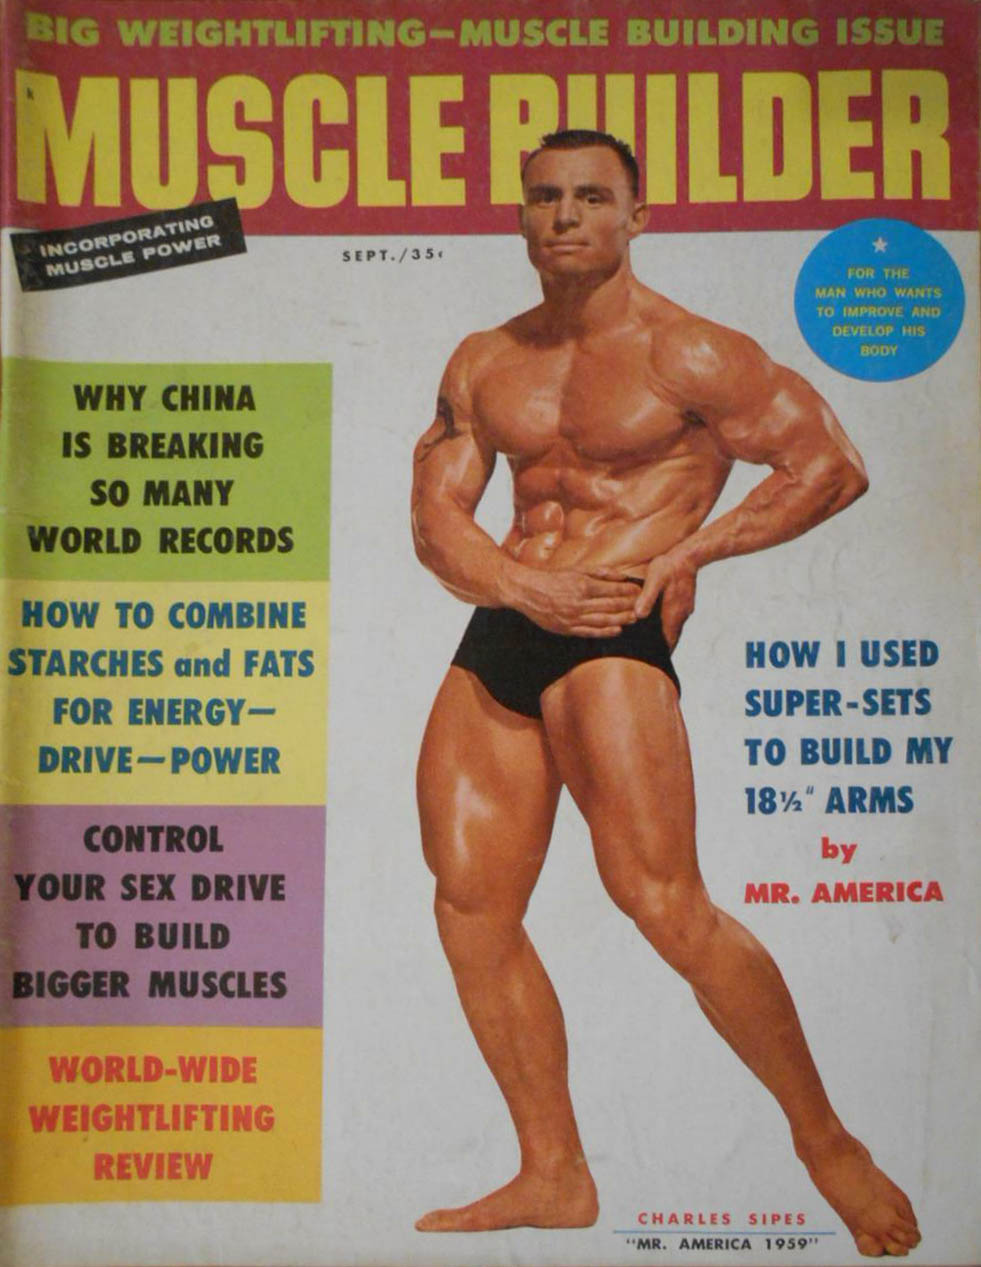 Muscle & Fitness September 1959, Muscle Builder